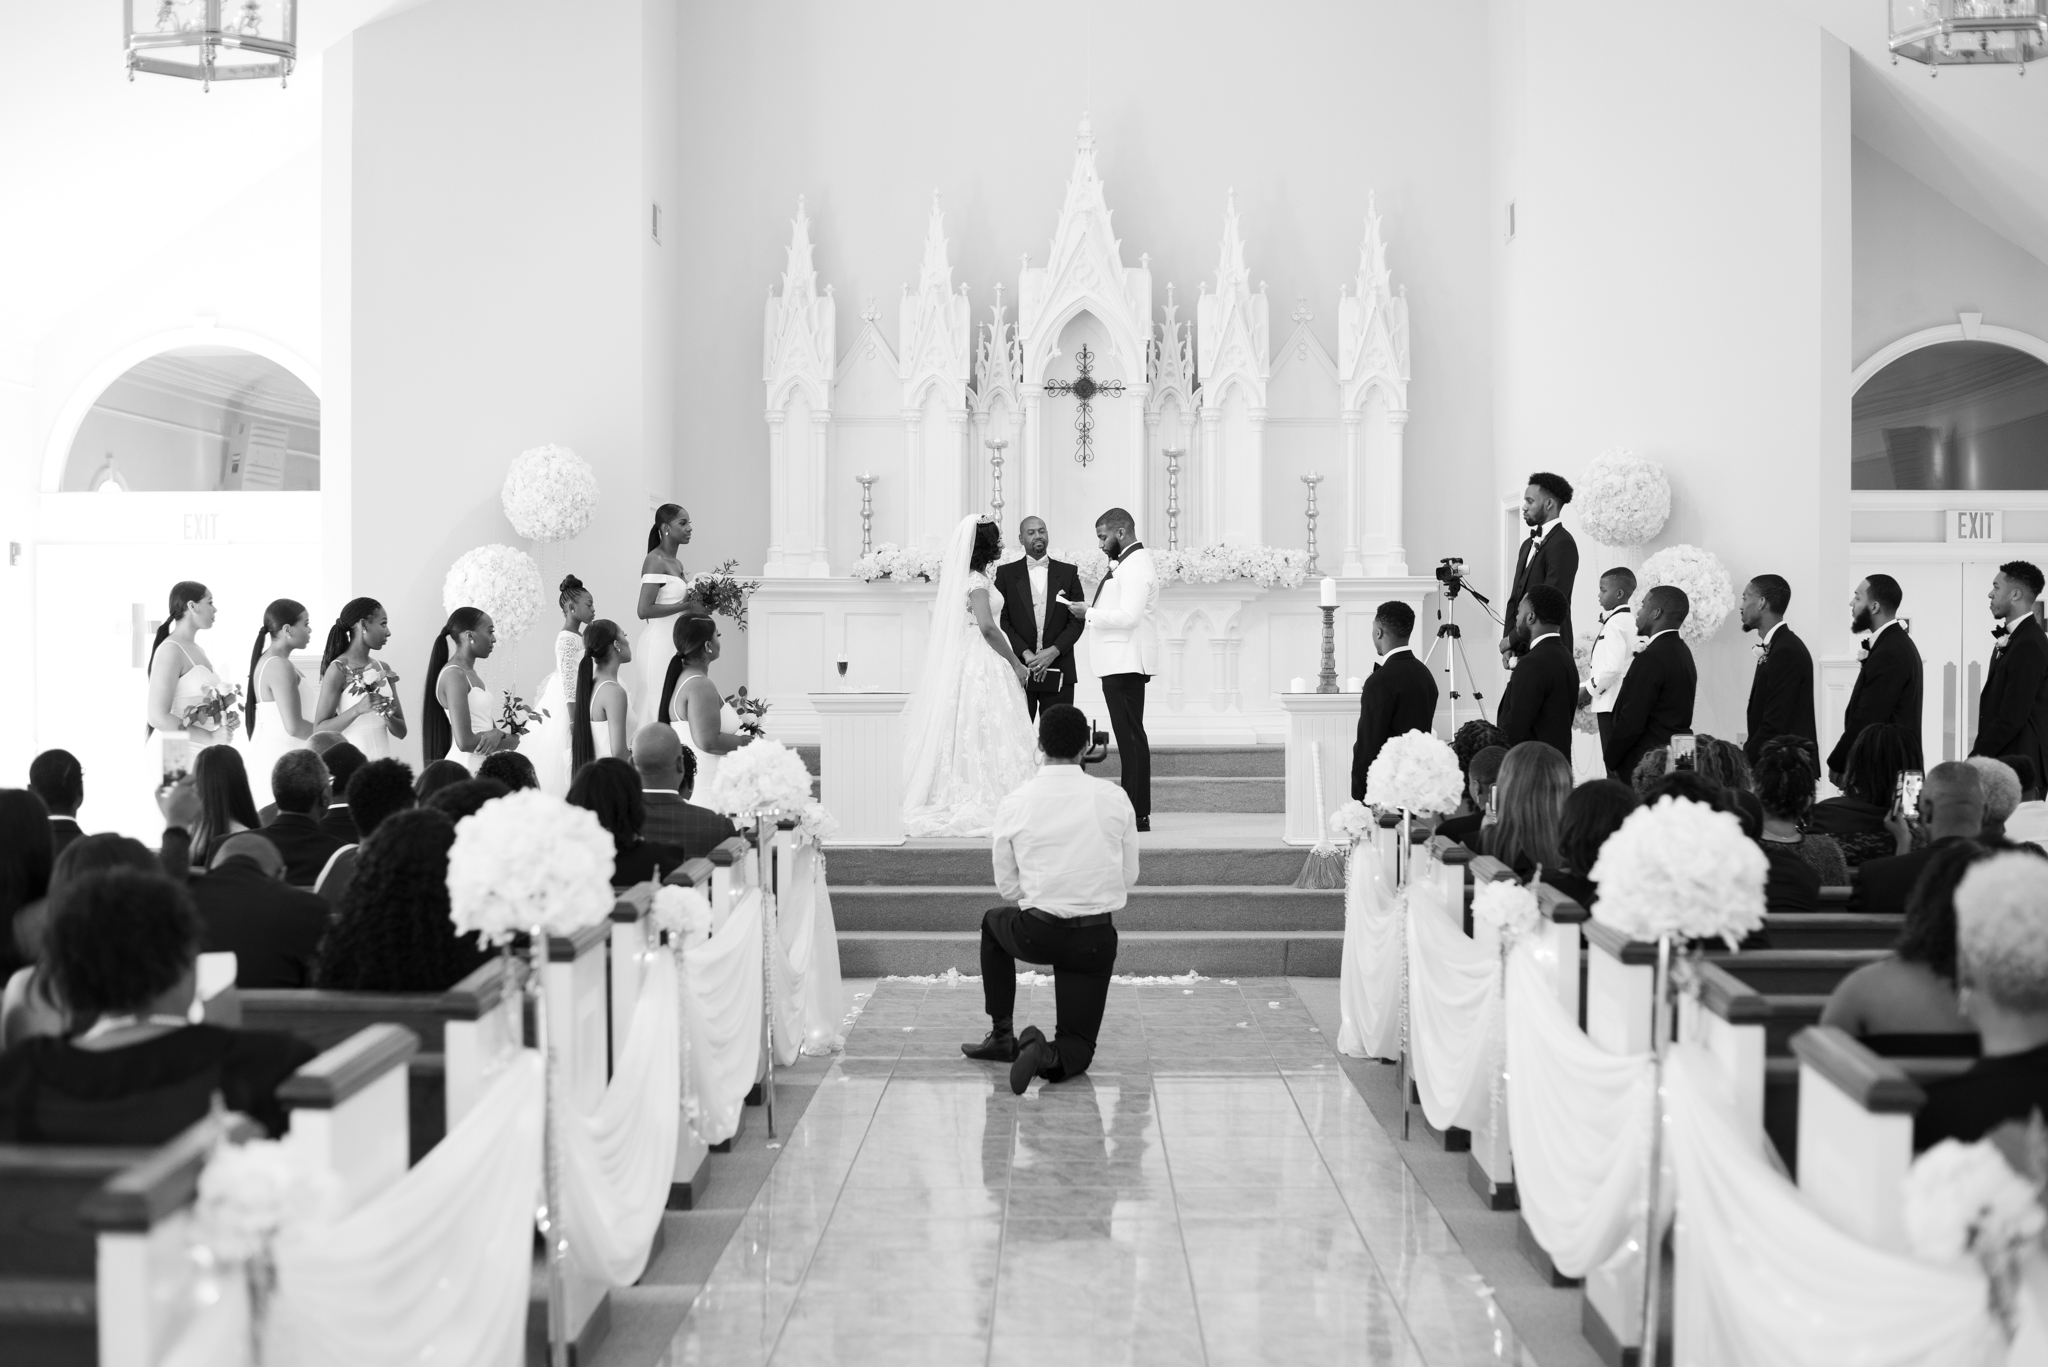 Photo taken of bride and groom exchanging their vows at Pristine Chapel, on their wedding day.